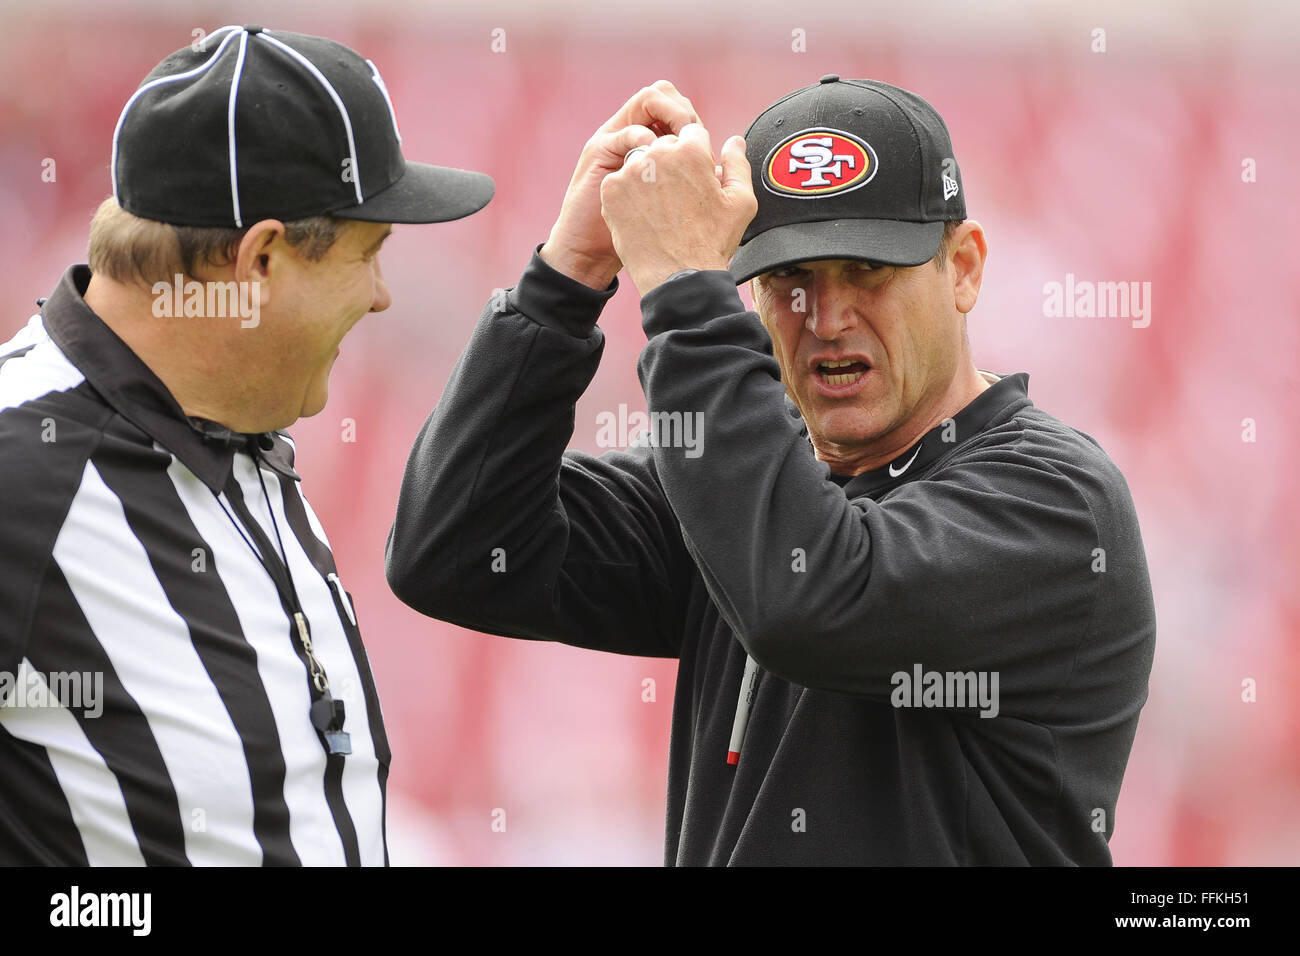 Tampa, FL, USA. 15th Dec, 2013. San Francisco 49ers head coach Jim Harbaugh during the 49ers 33-14 win over the Tampa Bay Buccaneers at Raymond James Stadium on December 15, 2013 in Tampa, Florida. ZUMA PRESS/Scott A. Miller © Scott A. Miller/ZUMA Wire/Alamy Live News Stock Photo